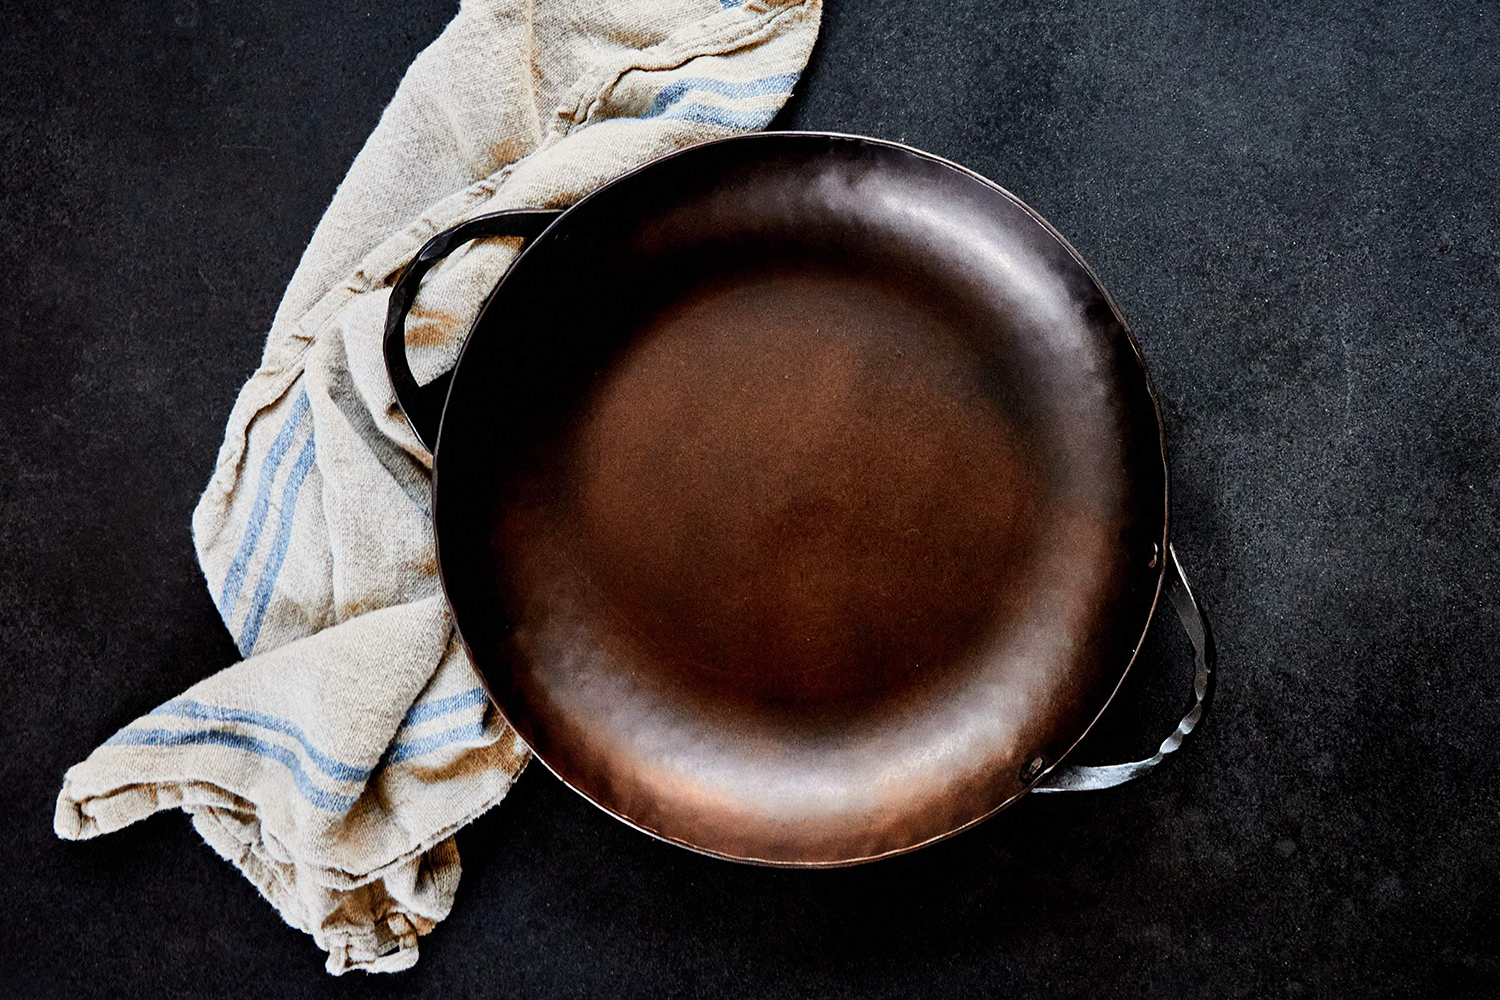 The Carbon Steel Round Roaster Pan from Smithey. We reviewed the heritage cookware to see how it cooks.